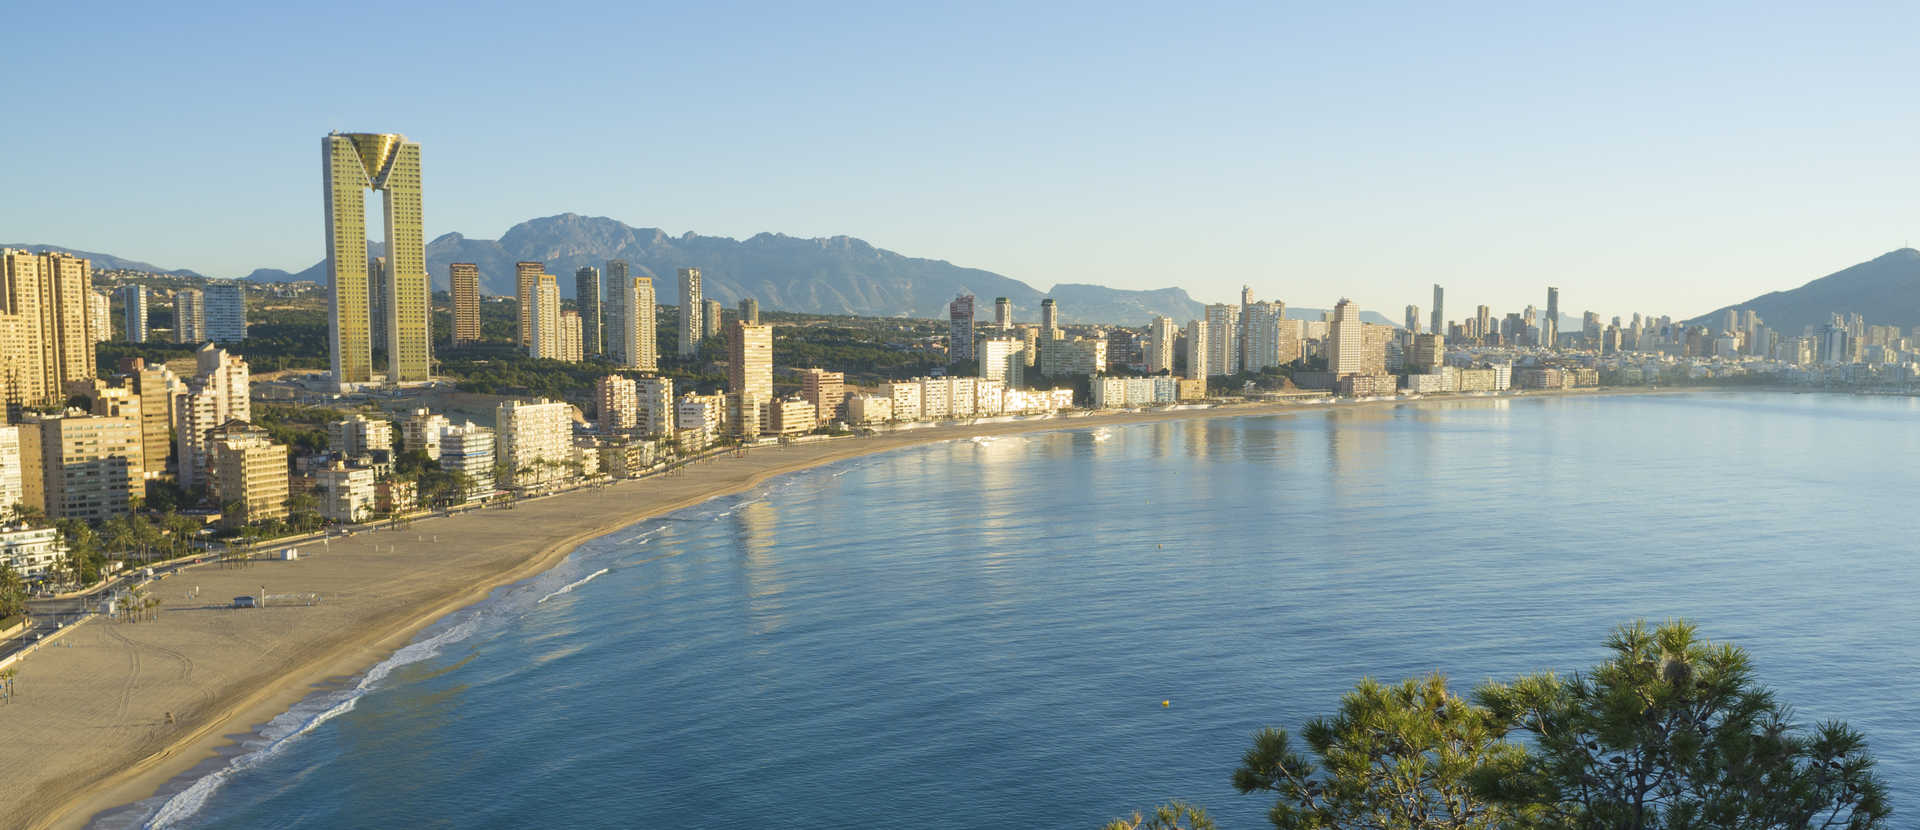 what to see in benidorm in 3 days